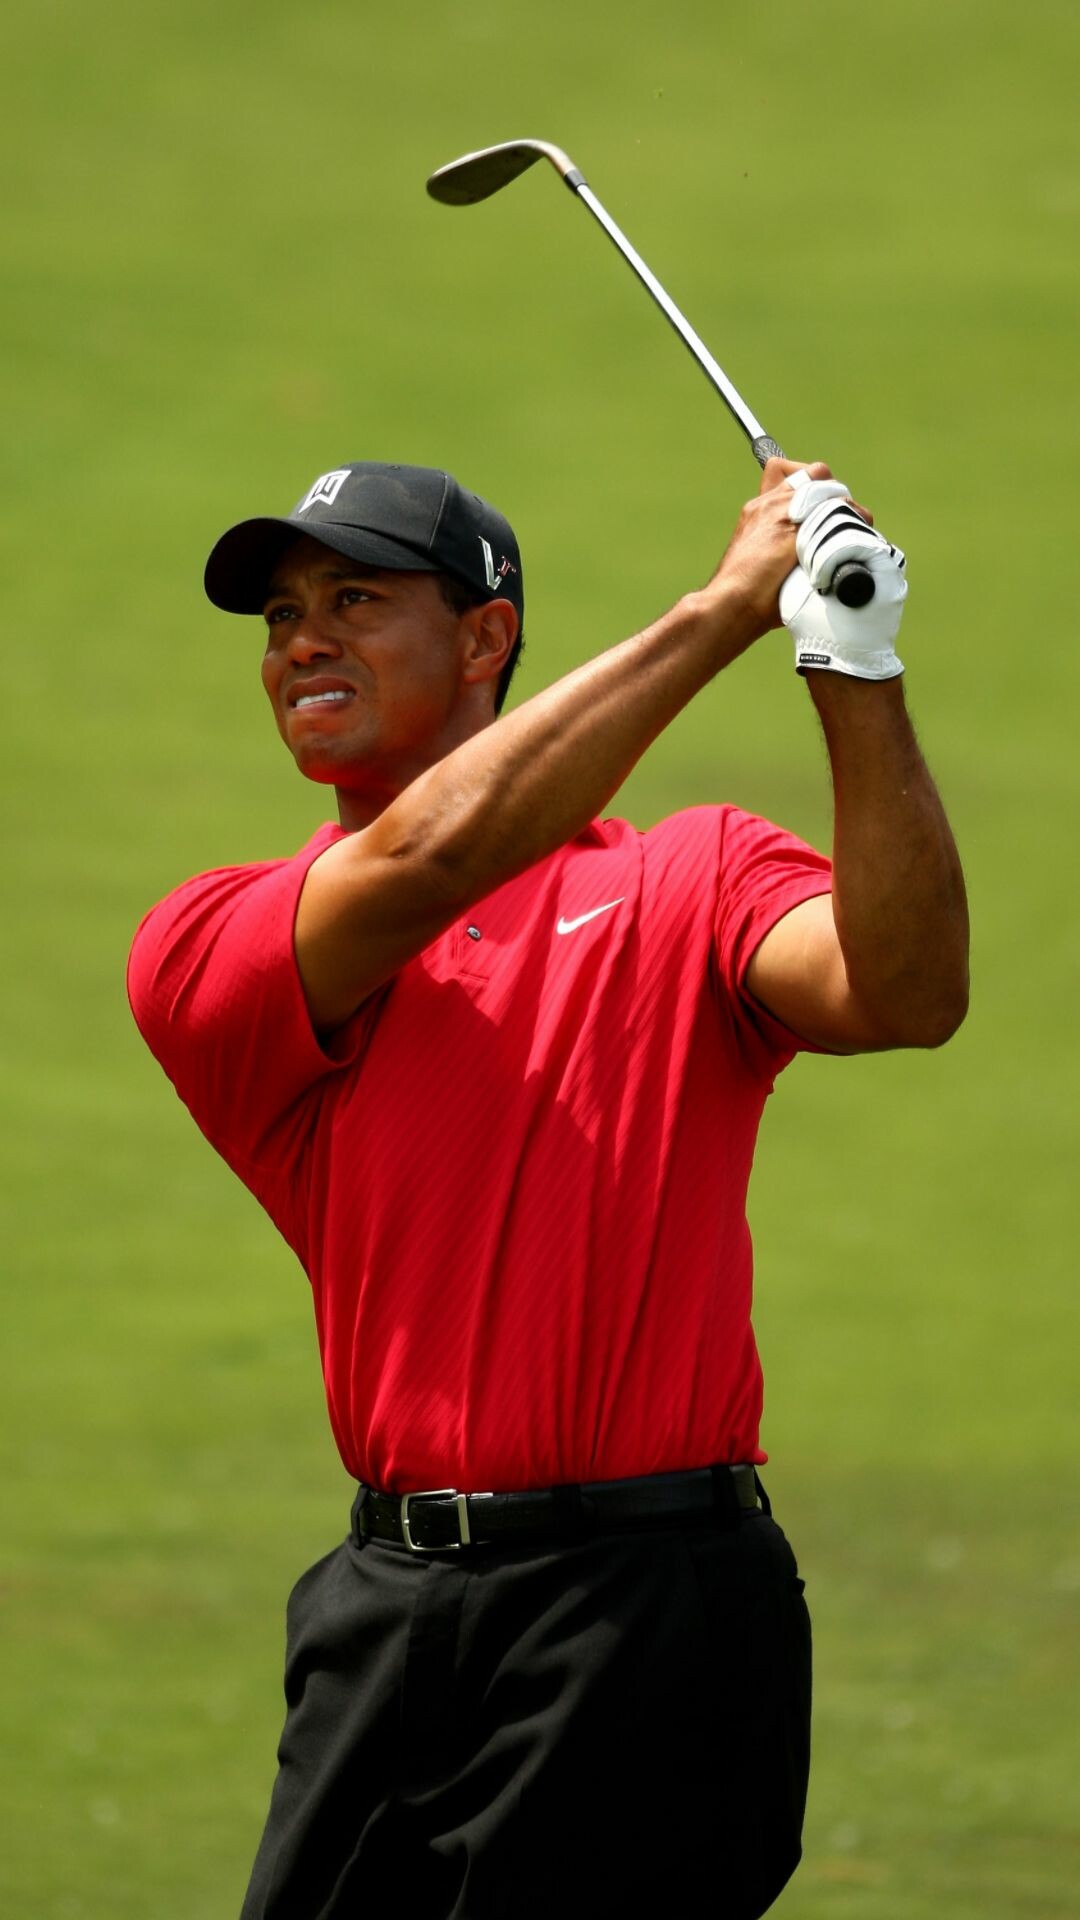 Tiger Woods: He became the only player to win four consecutive major professional golf titles. 1080x1920 Full HD Wallpaper.